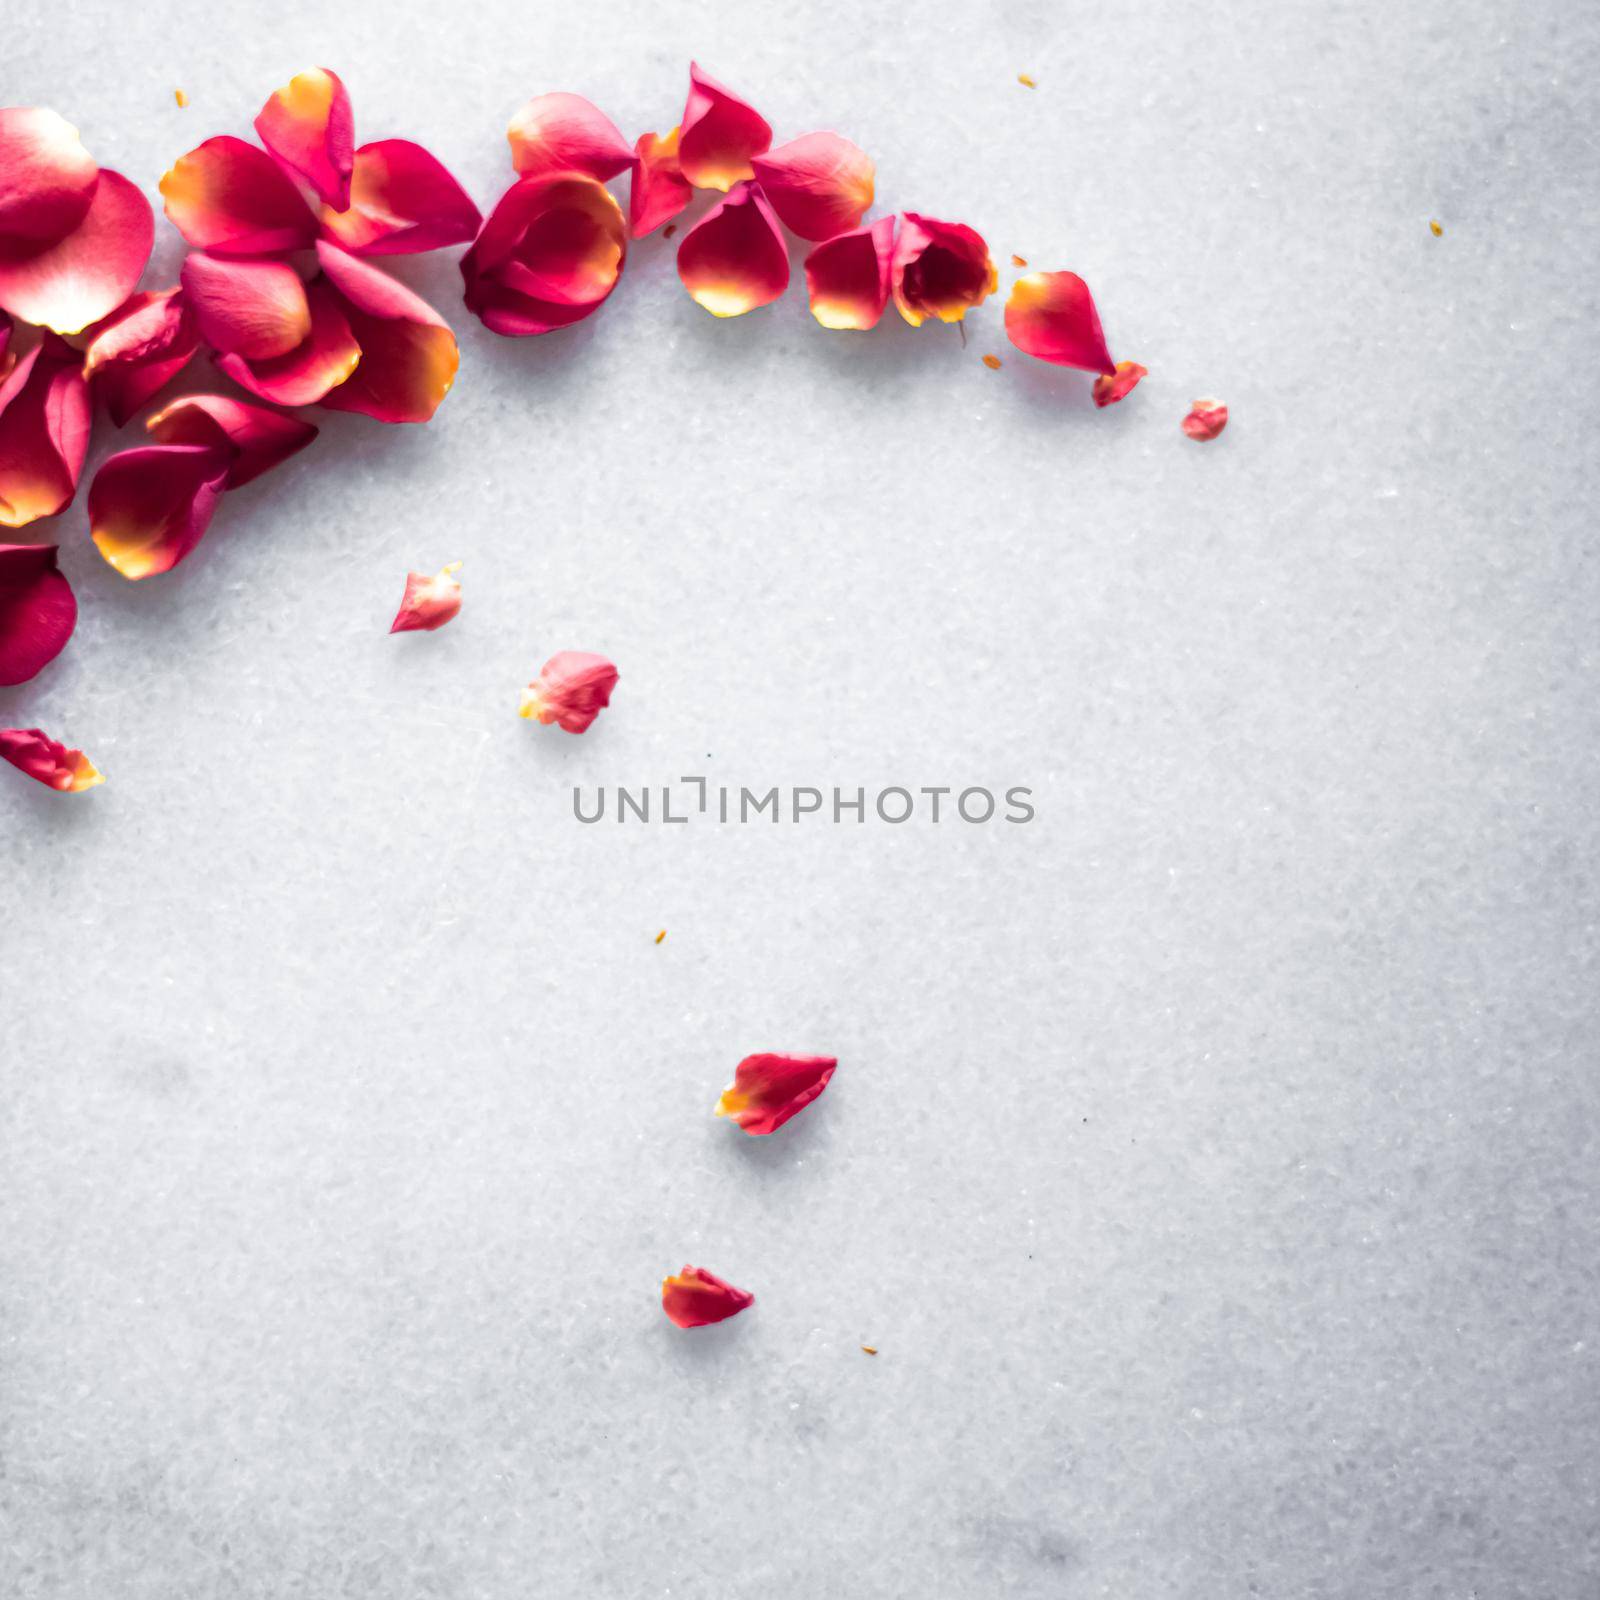 Rose petals on marble background, floral decor and wedding flatlay, holiday greeting card backdrop for event invitation, flat lay design by Anneleven